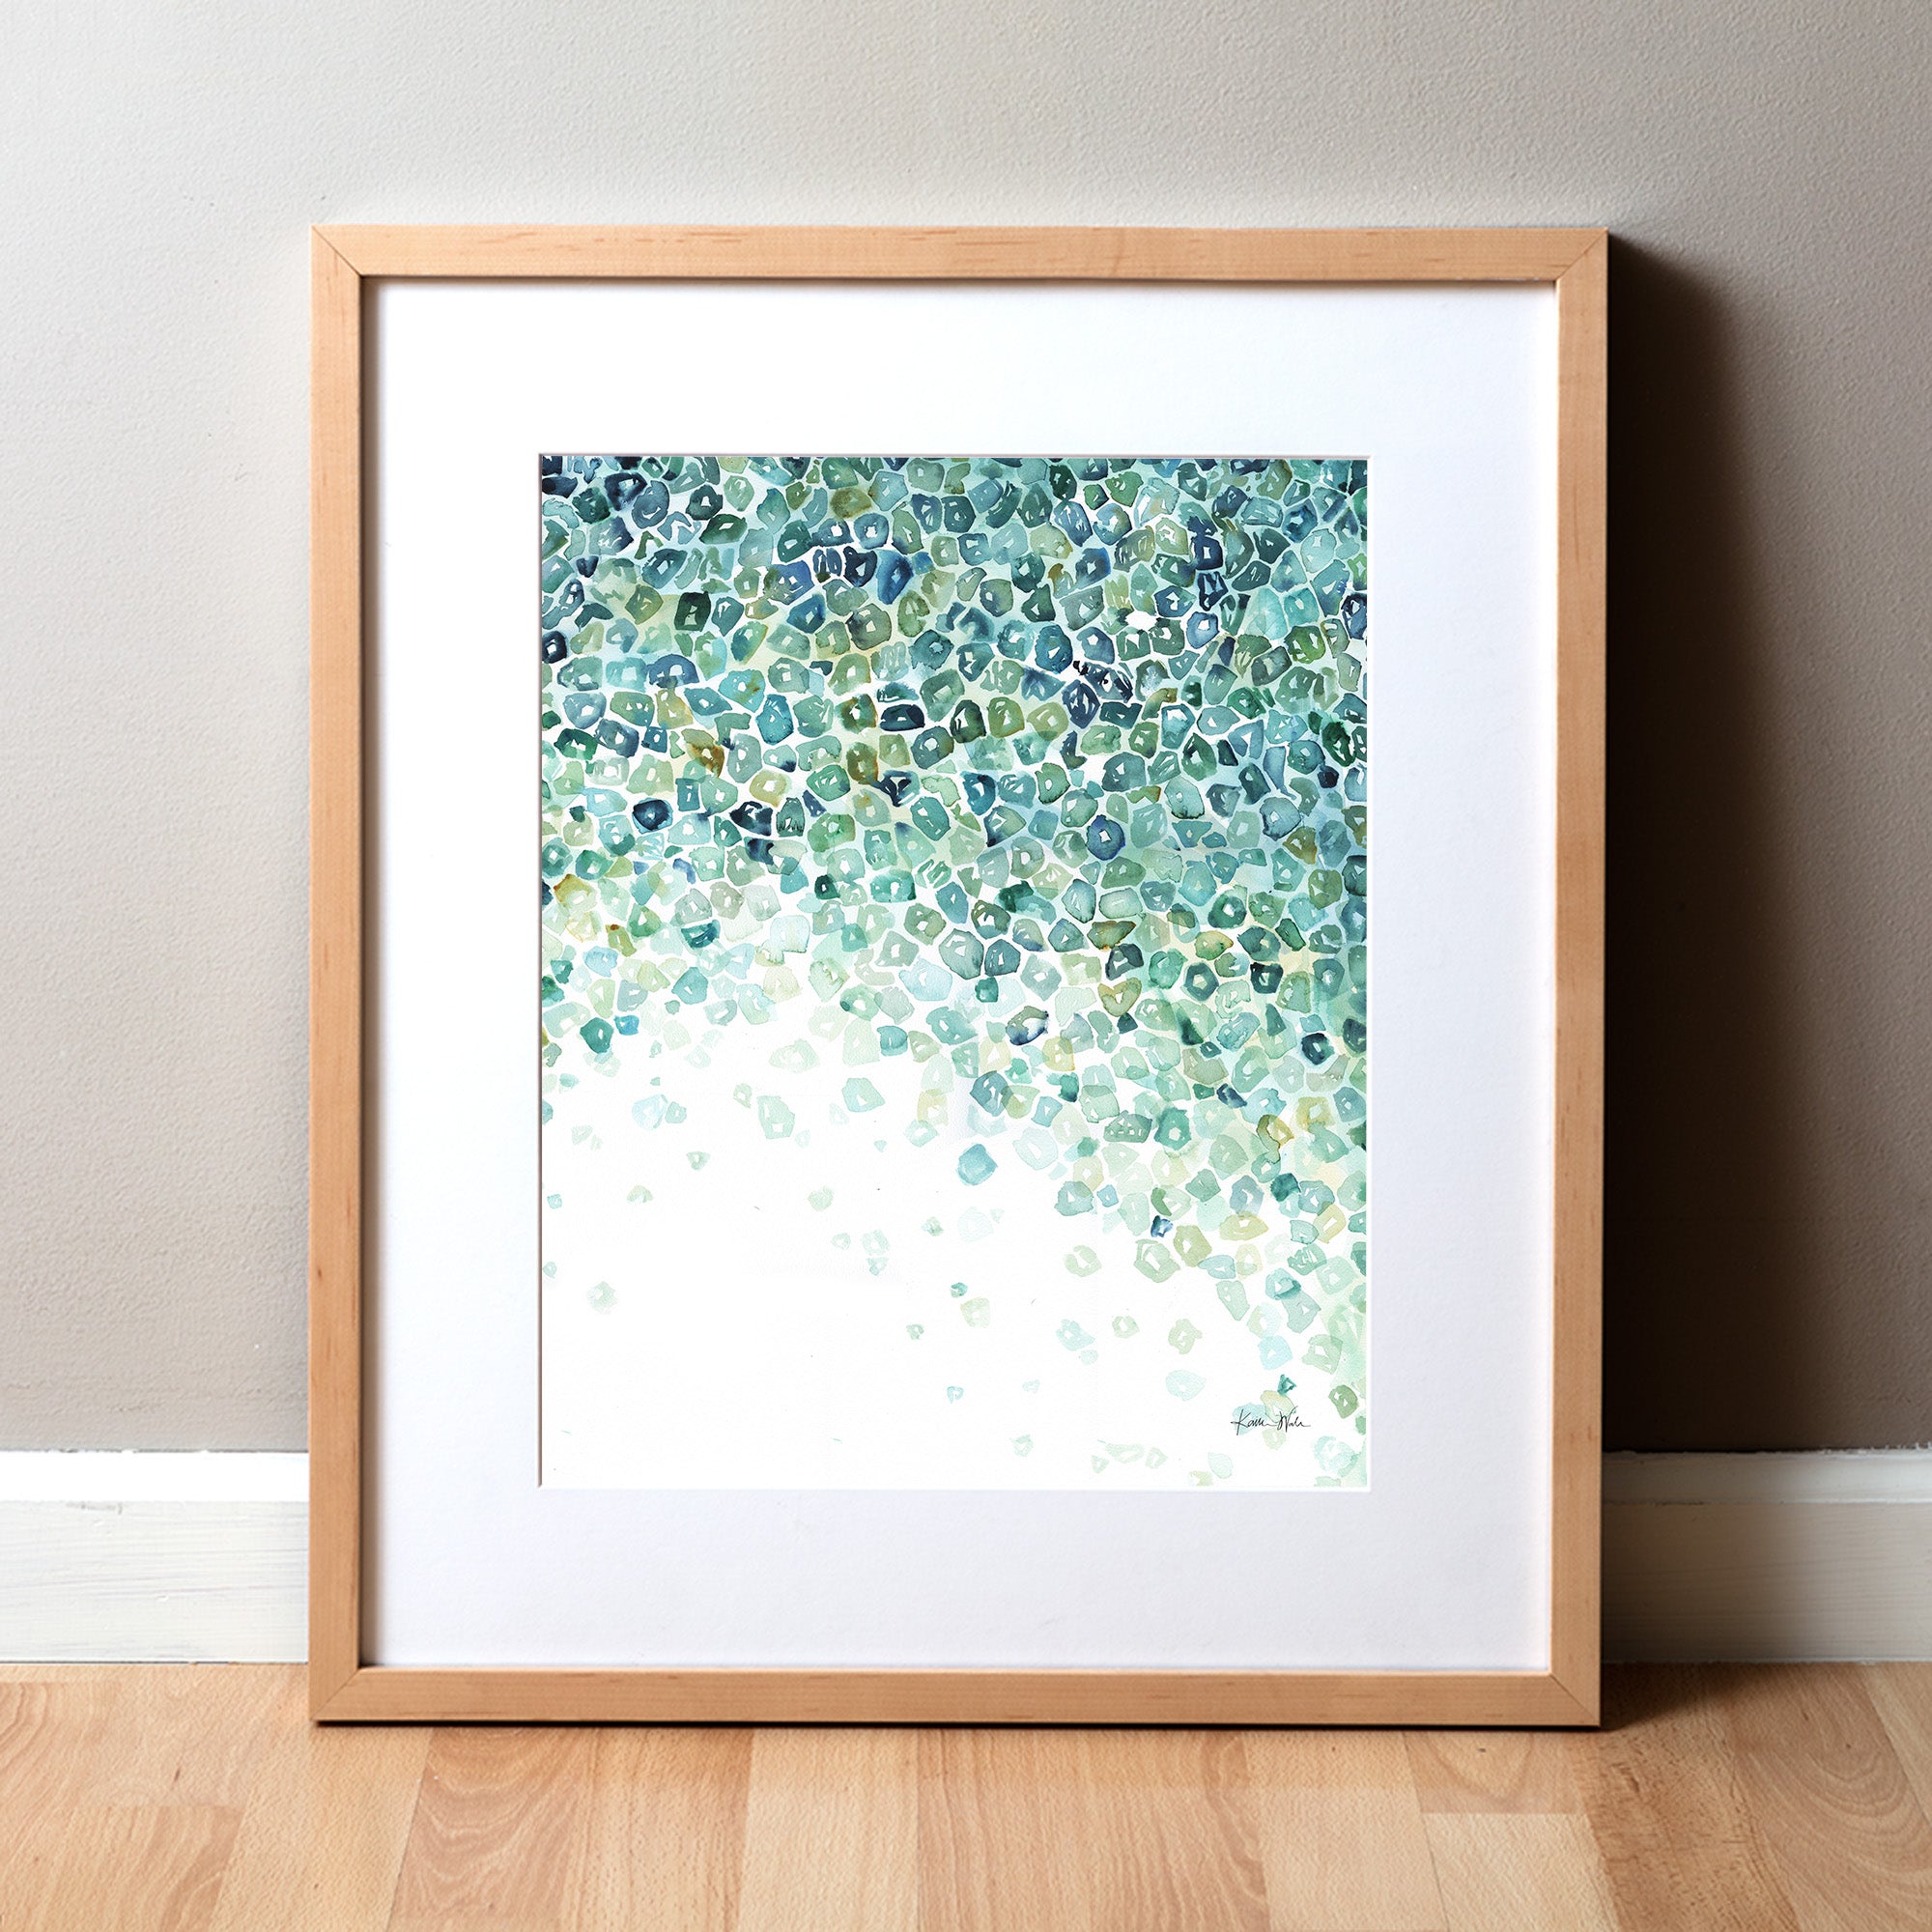 Framed watercolor painting of the tapetum lucidum tissue in animal eyes. 